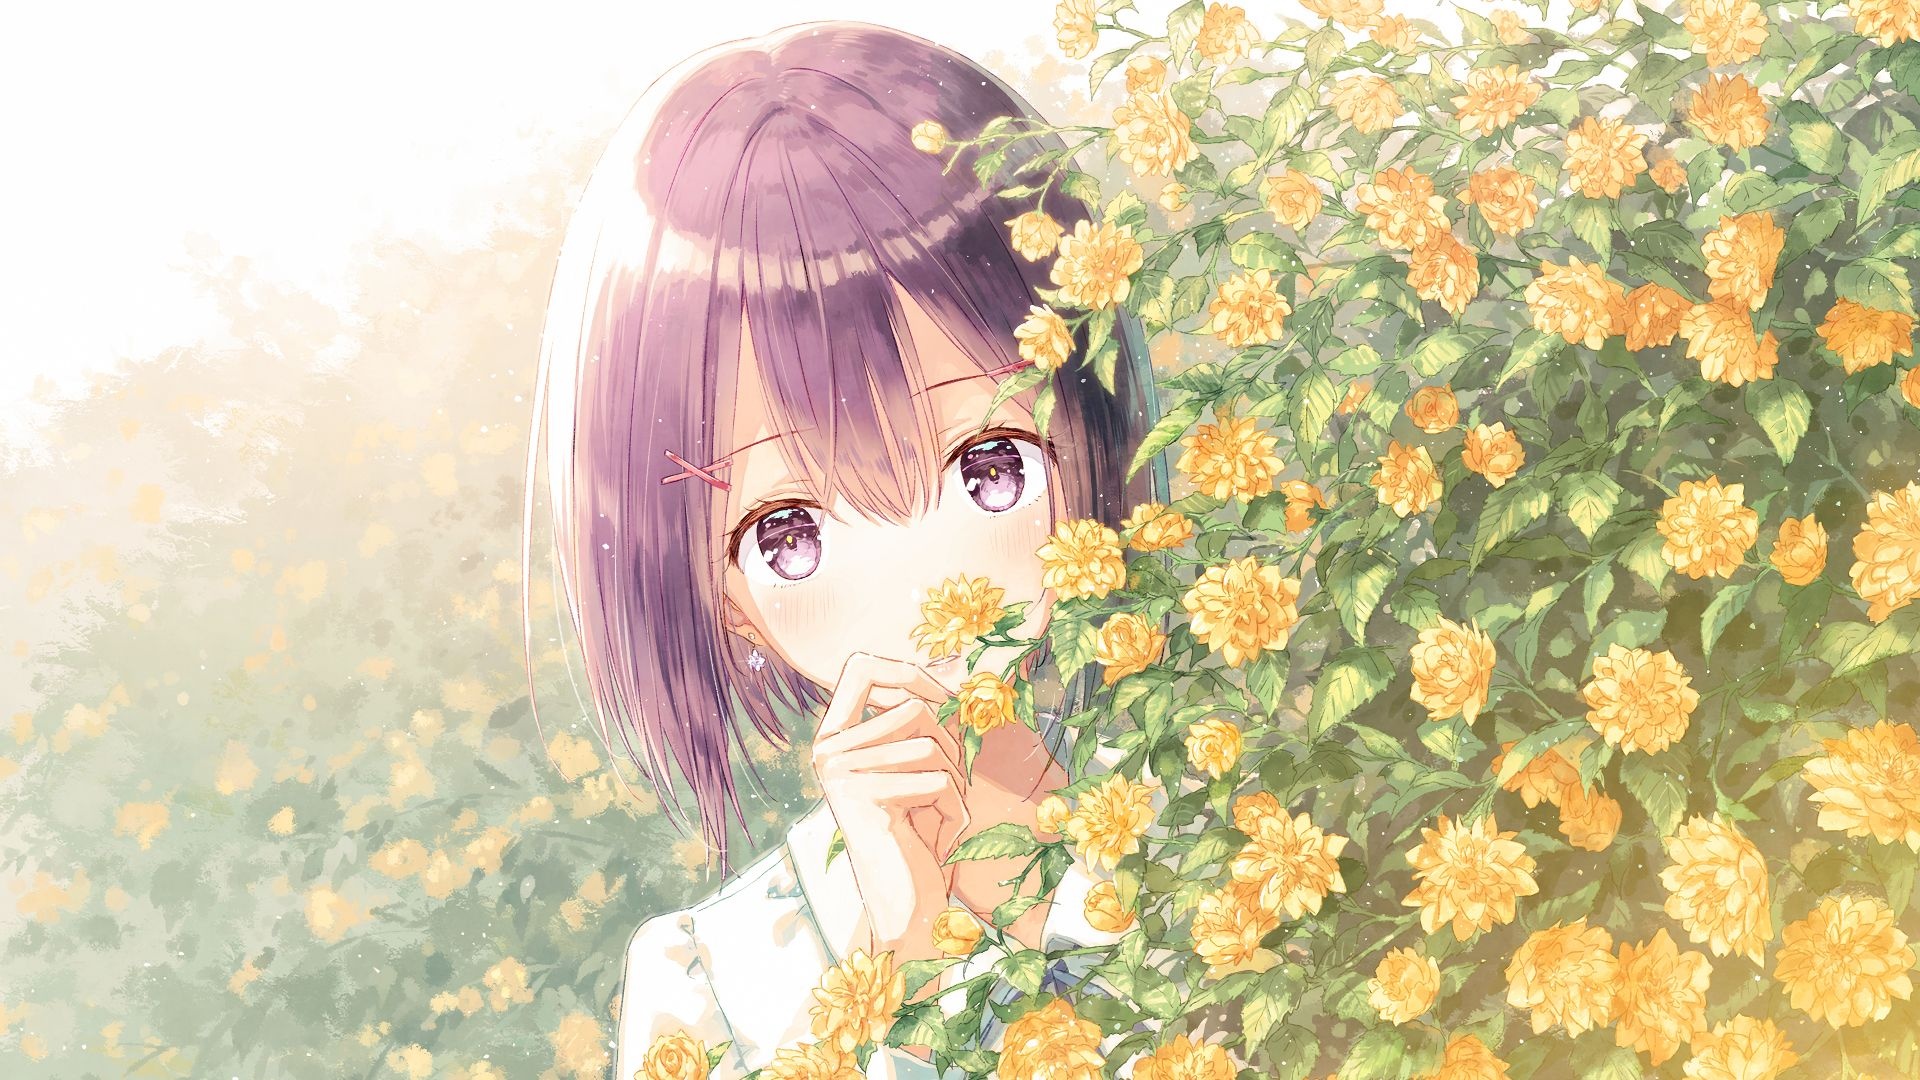 Anime Girl And Flowers 1080p wallpaper